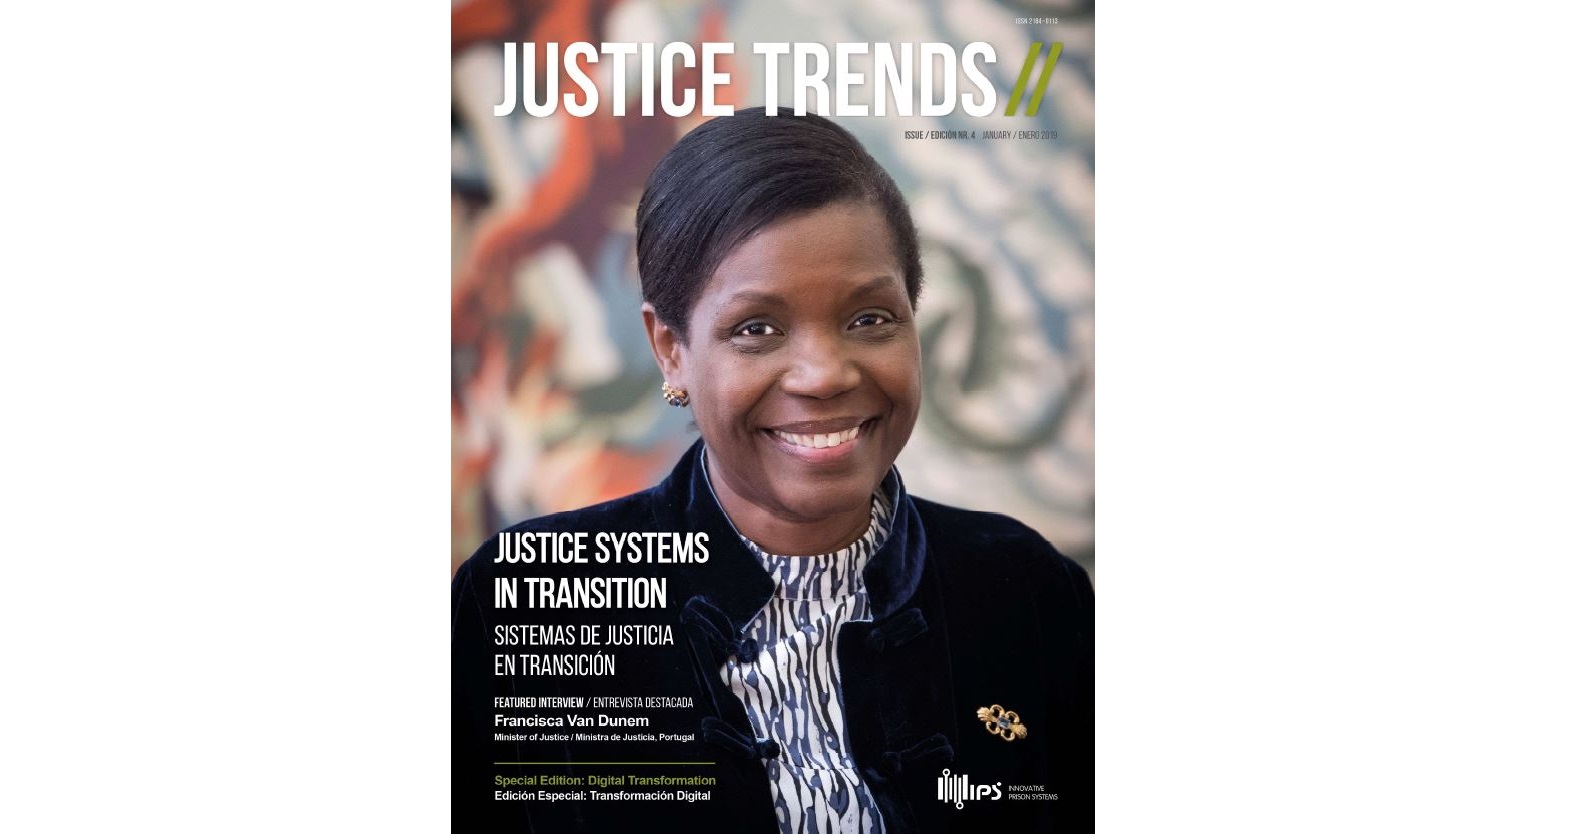 Upstreem’s Co-Founder & CEO is featured in the February 2019 issue of Justice Trends